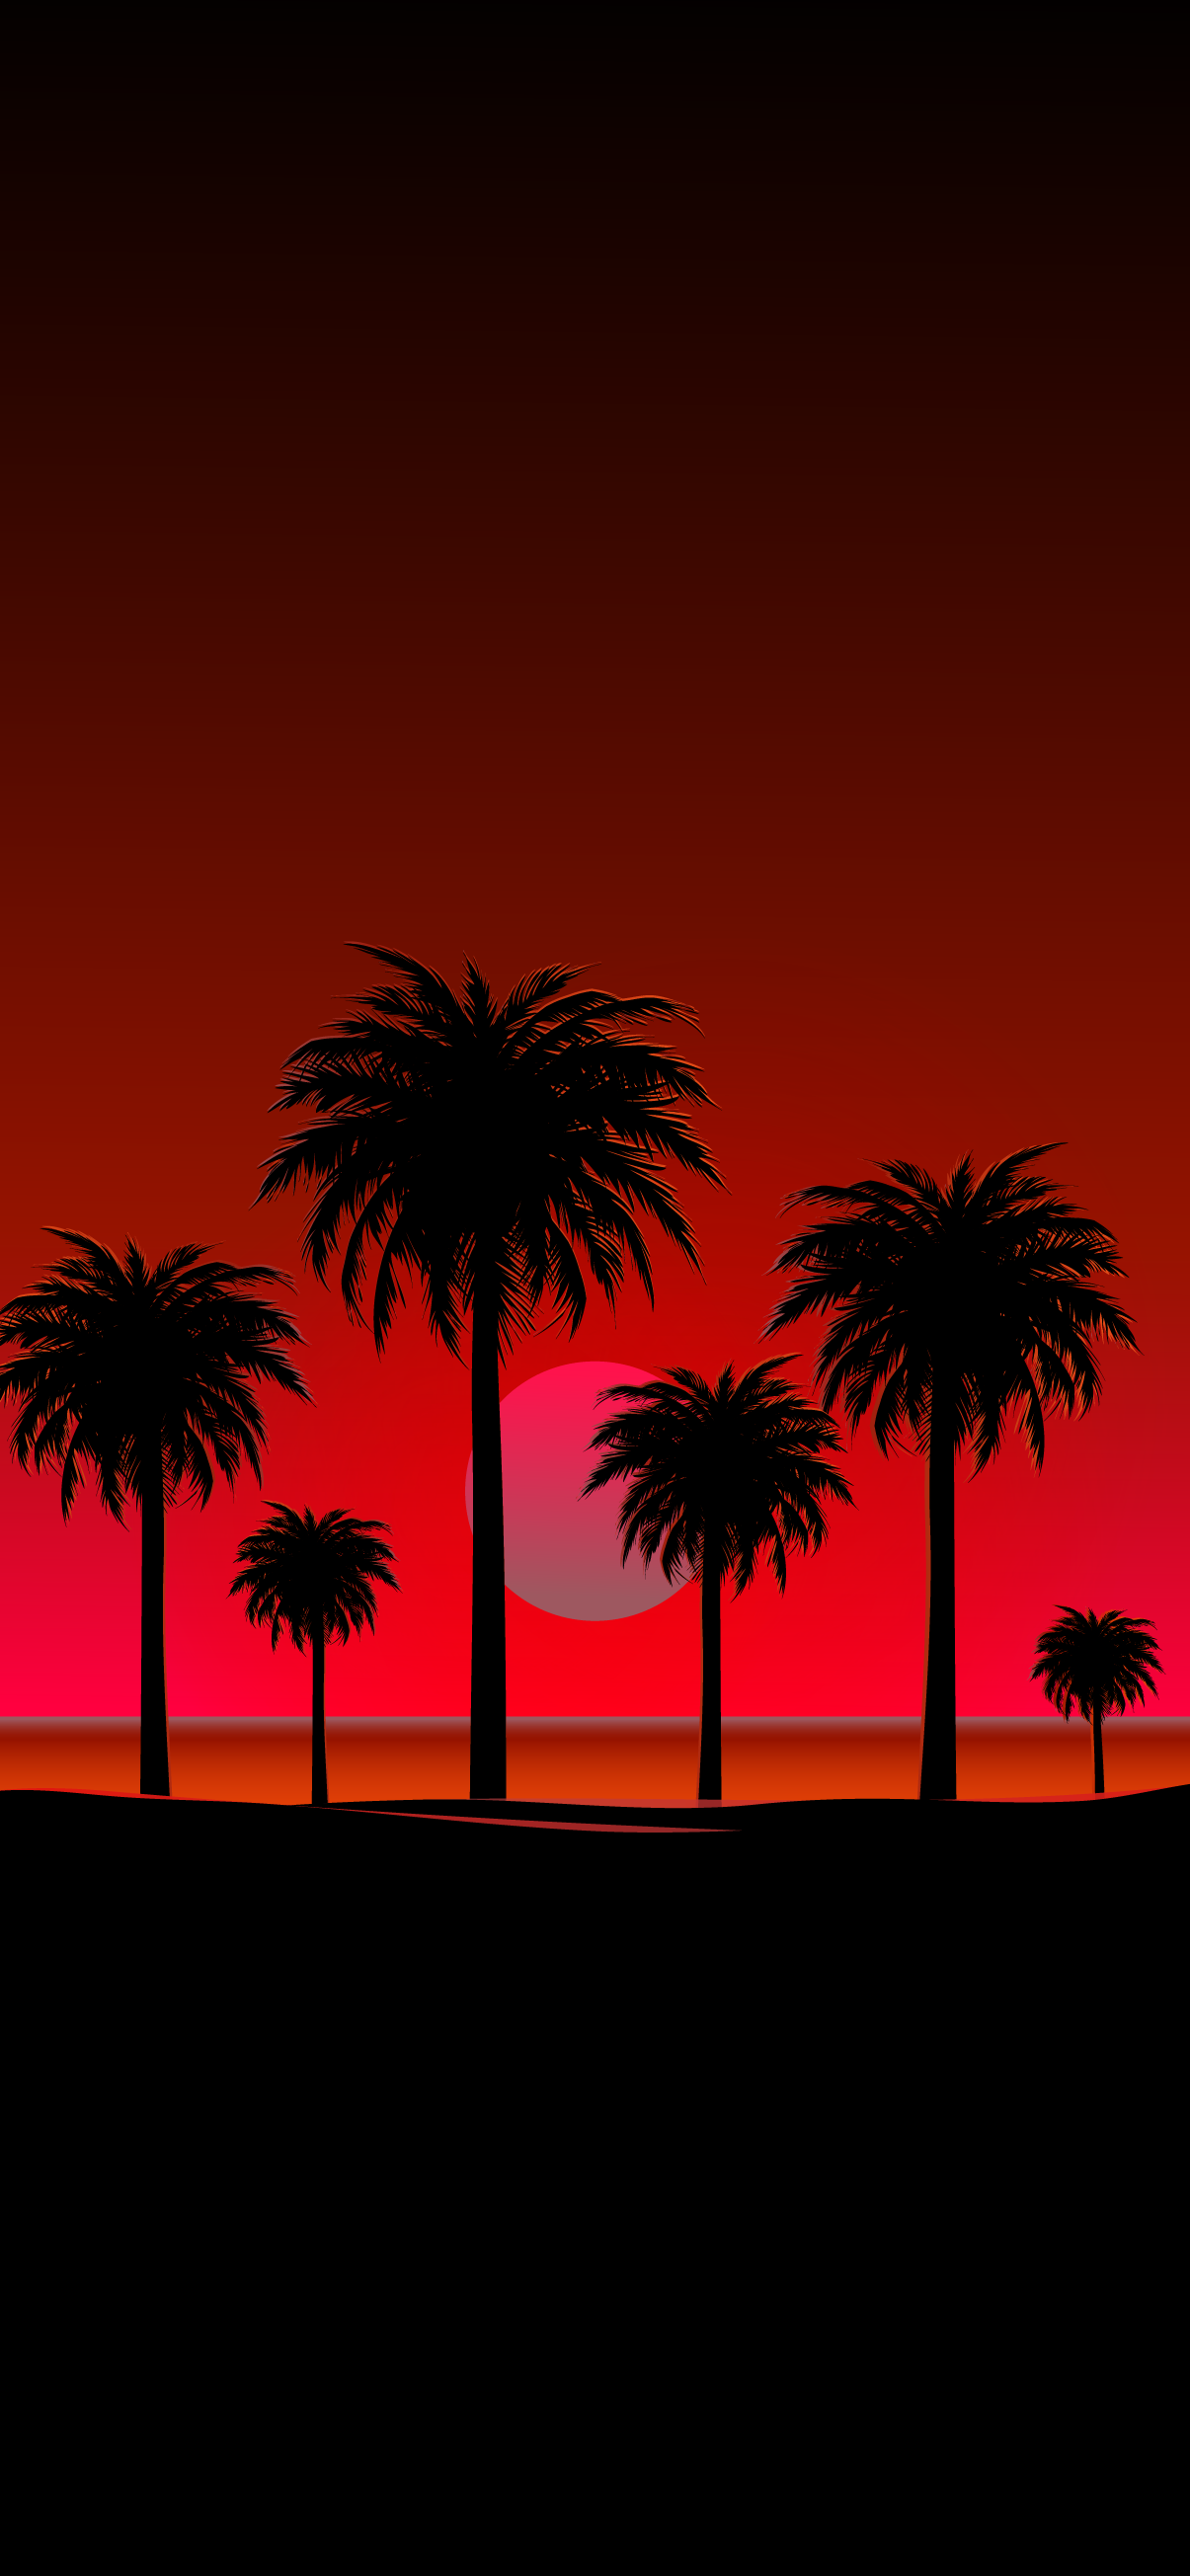 Phone Wallpaper HD 4k Beach Sunset With Palm Silhouettes. Heroscreen. High Quality Background Wallpaper